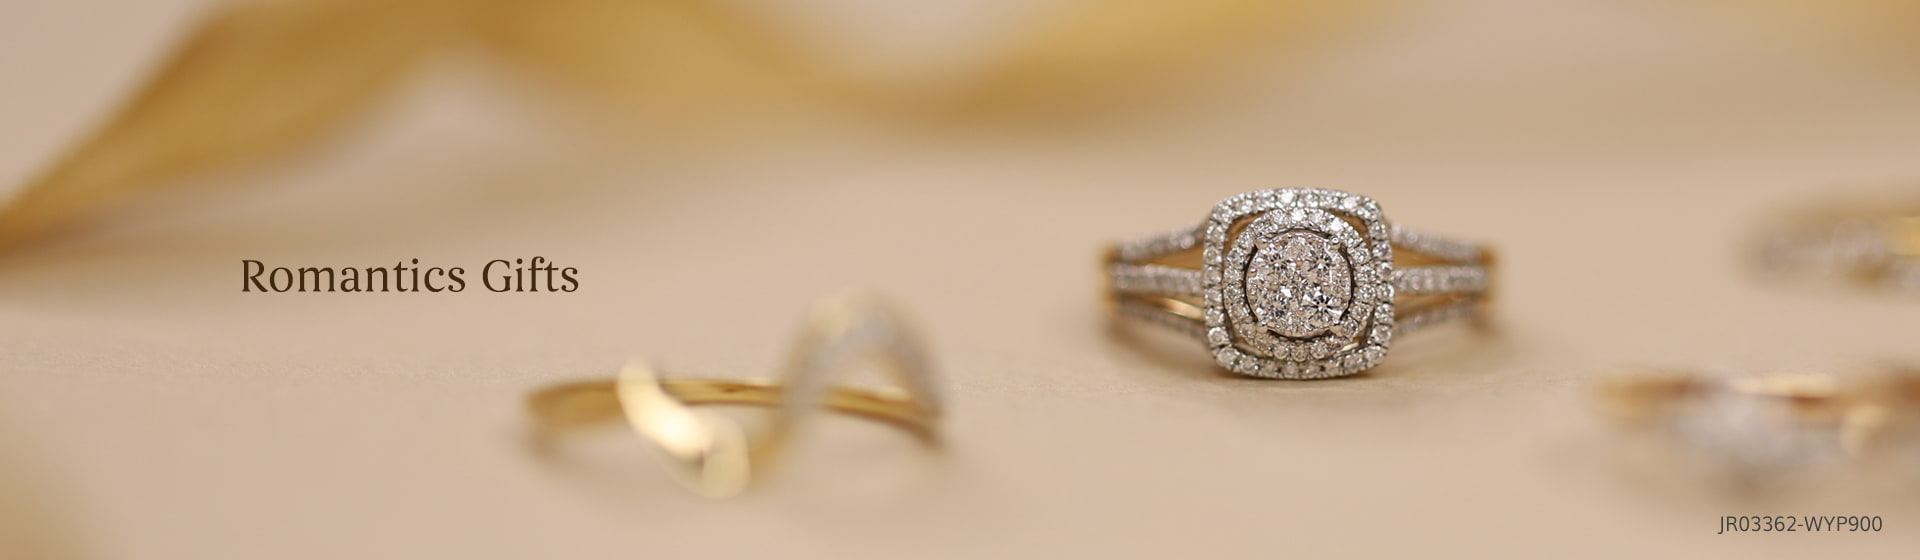 Best Romantic Gifts For Girlfriend Include Gorgeous Jewellery in Gold and Diamond